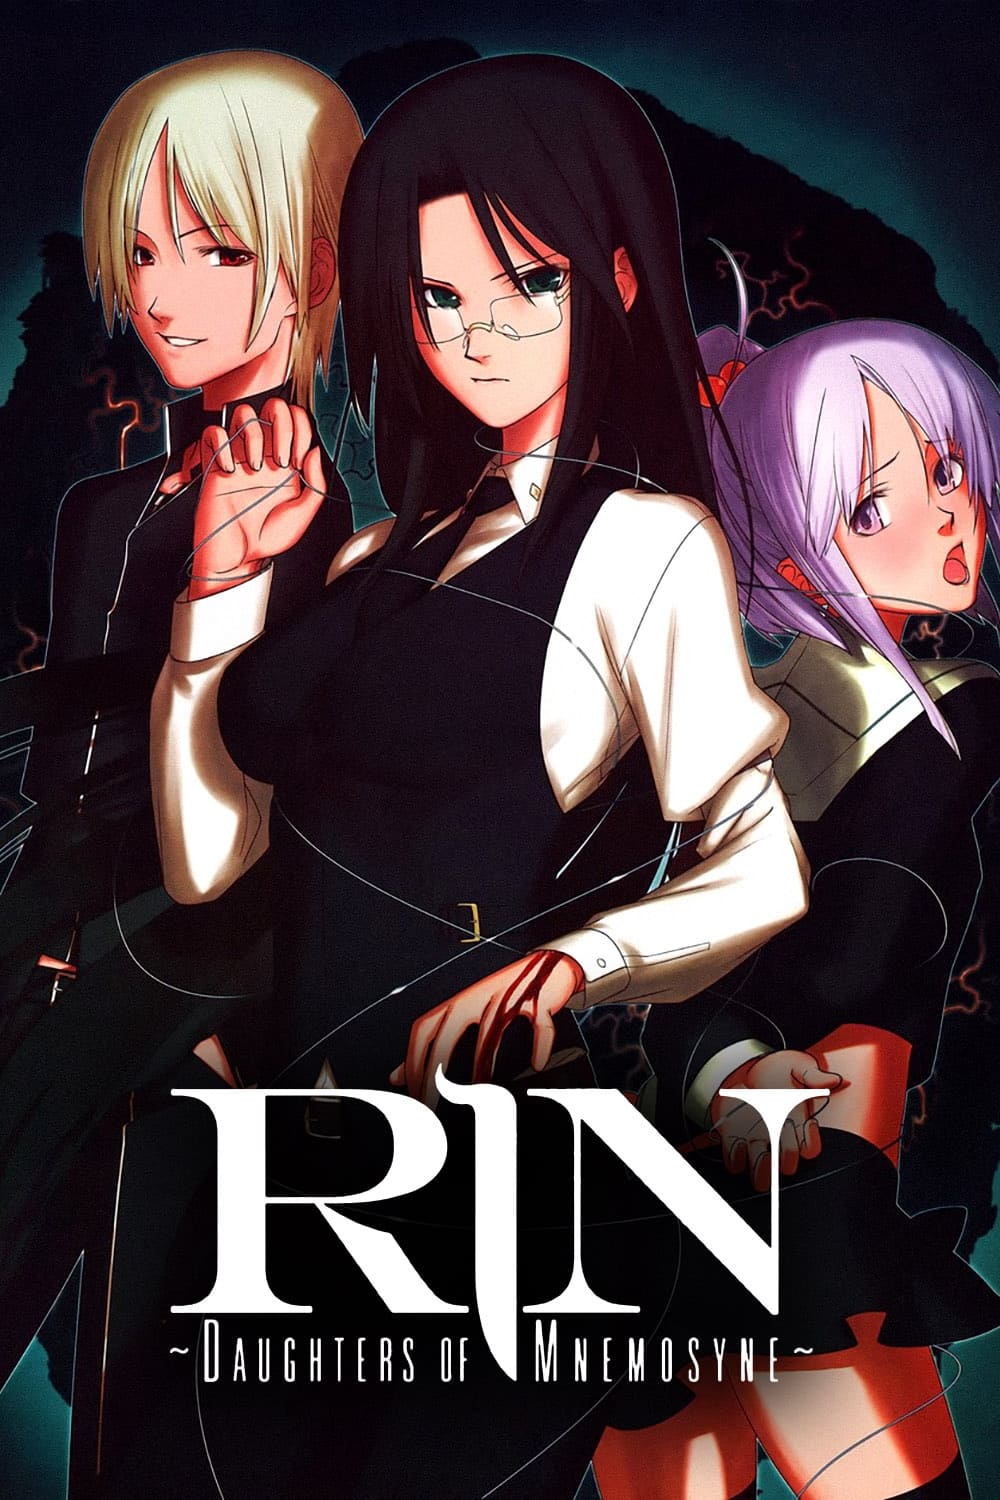 Rin - Daughters of Mnemosyne (2008)